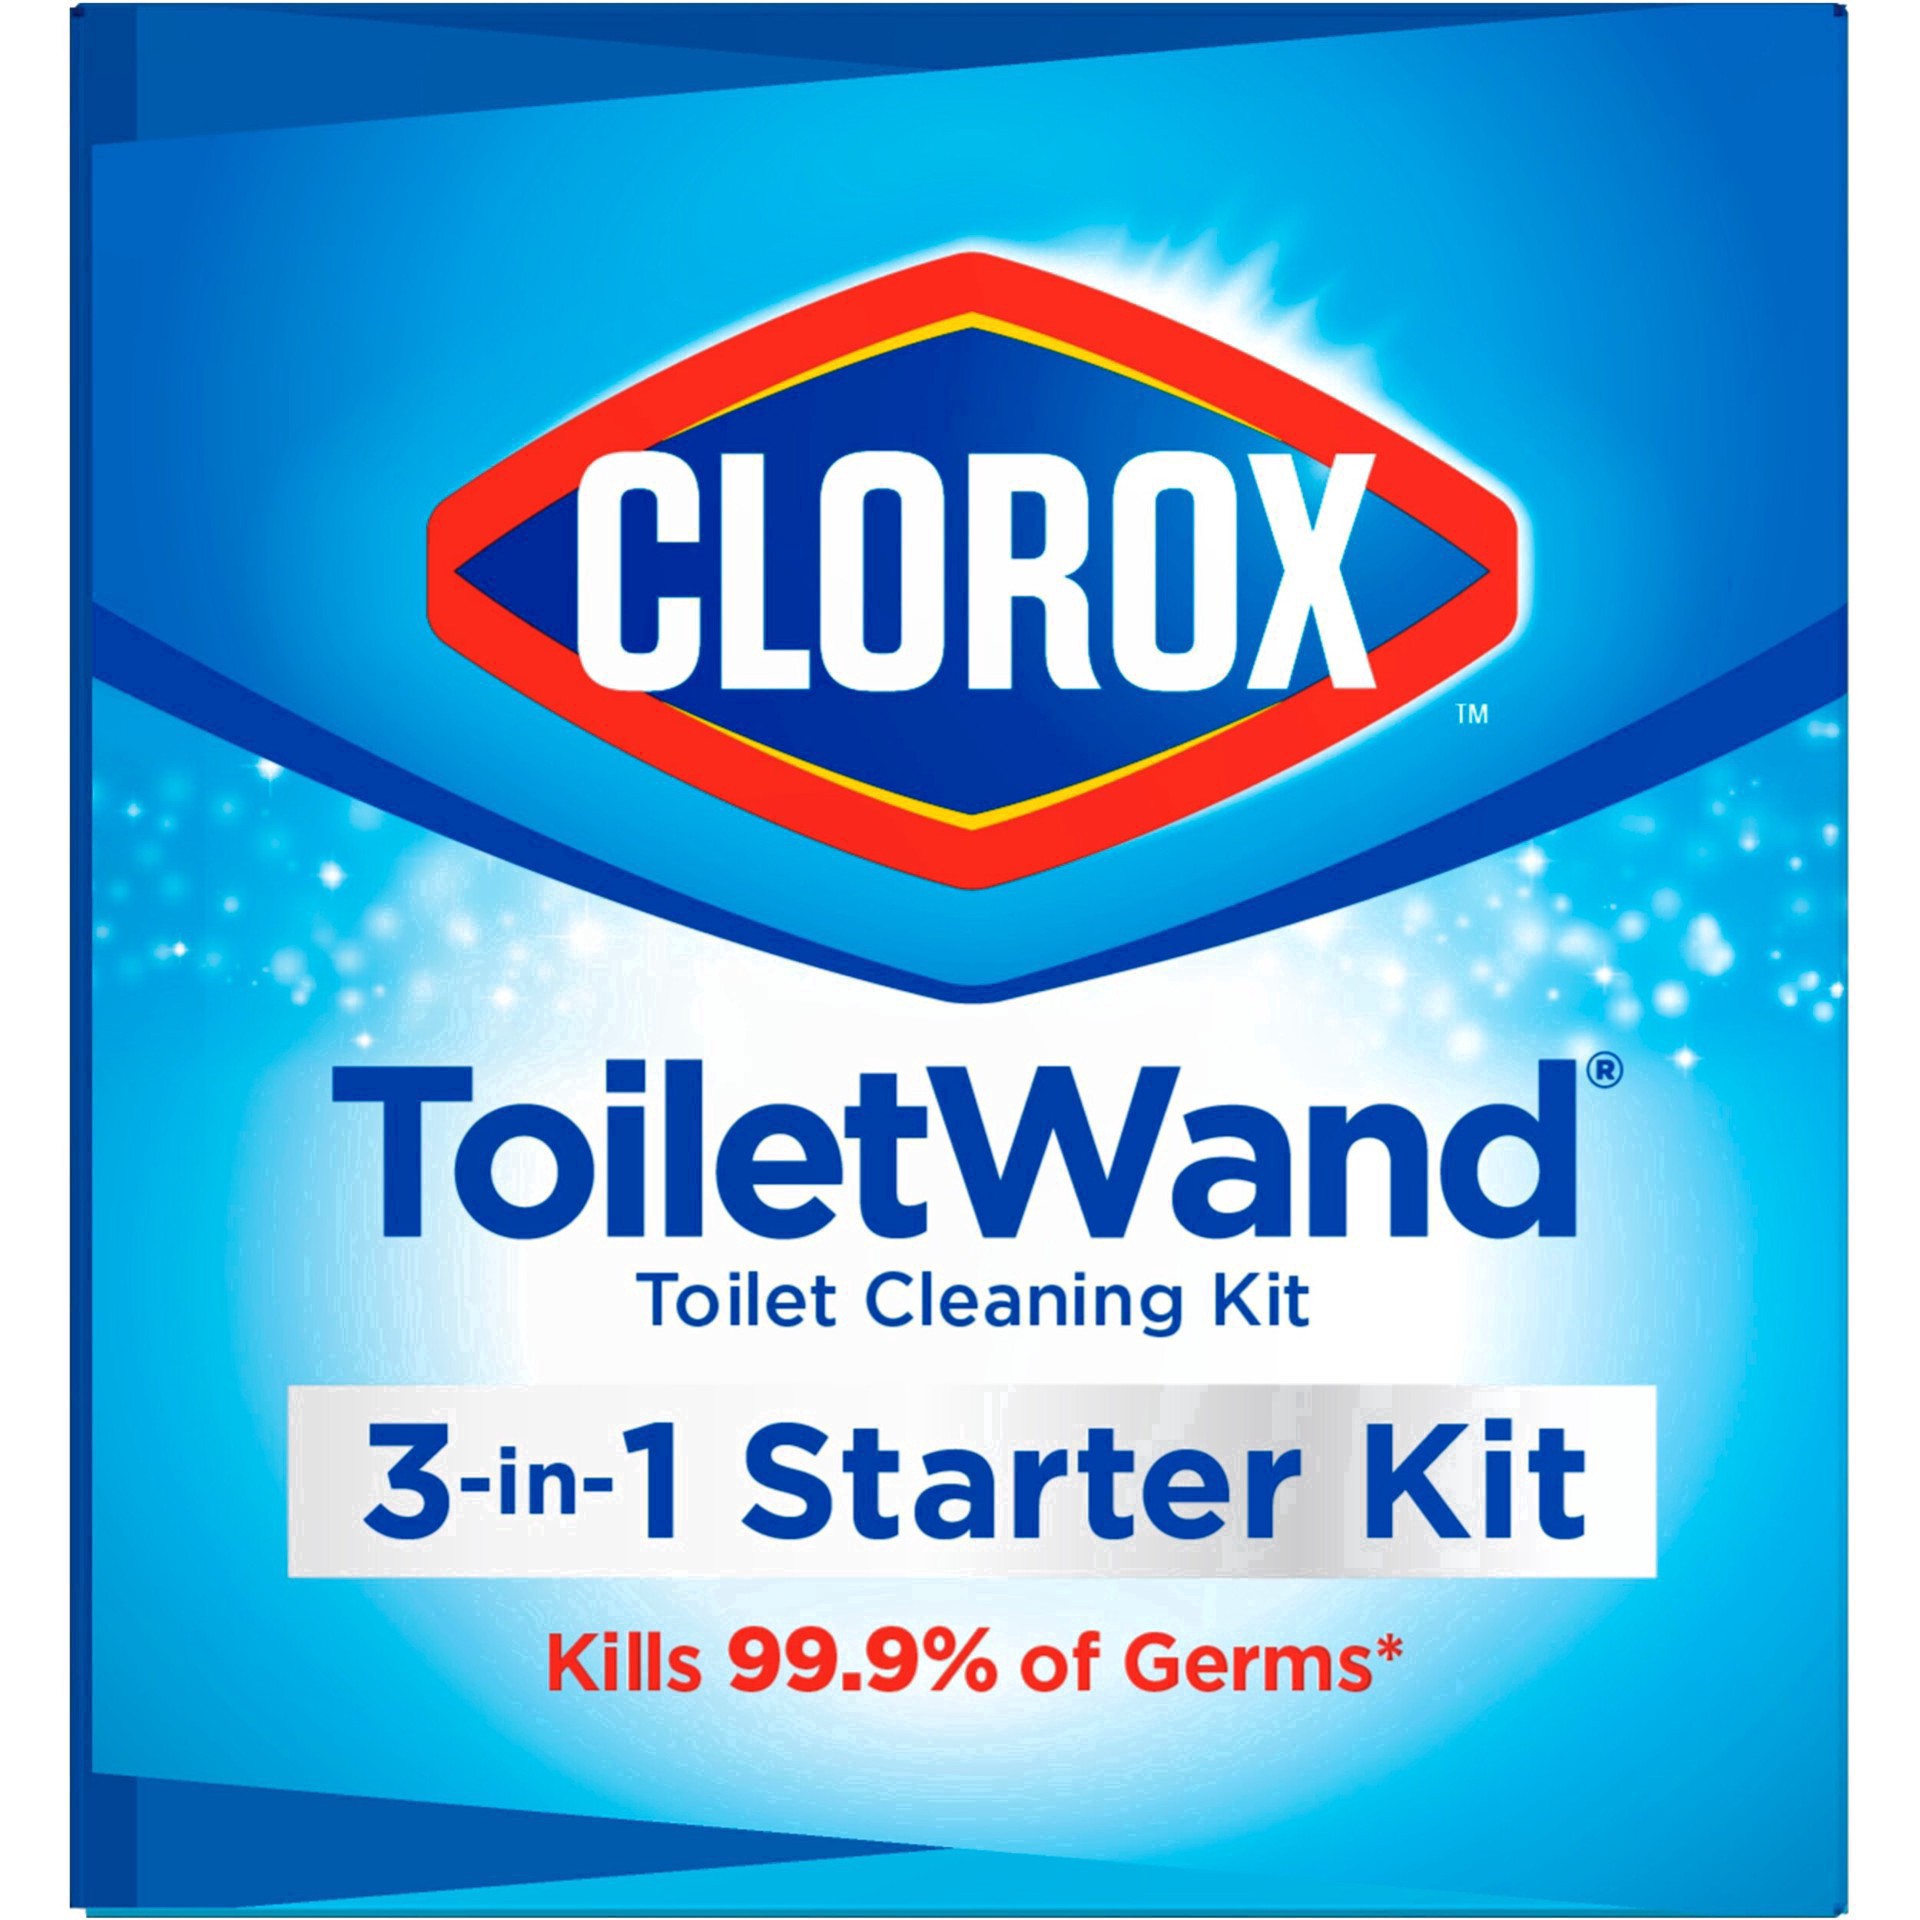 slide 122 of 176, Clorox Toilet Wand 3-in-1 Starter Toliet Cleaning Kit, 1 ct